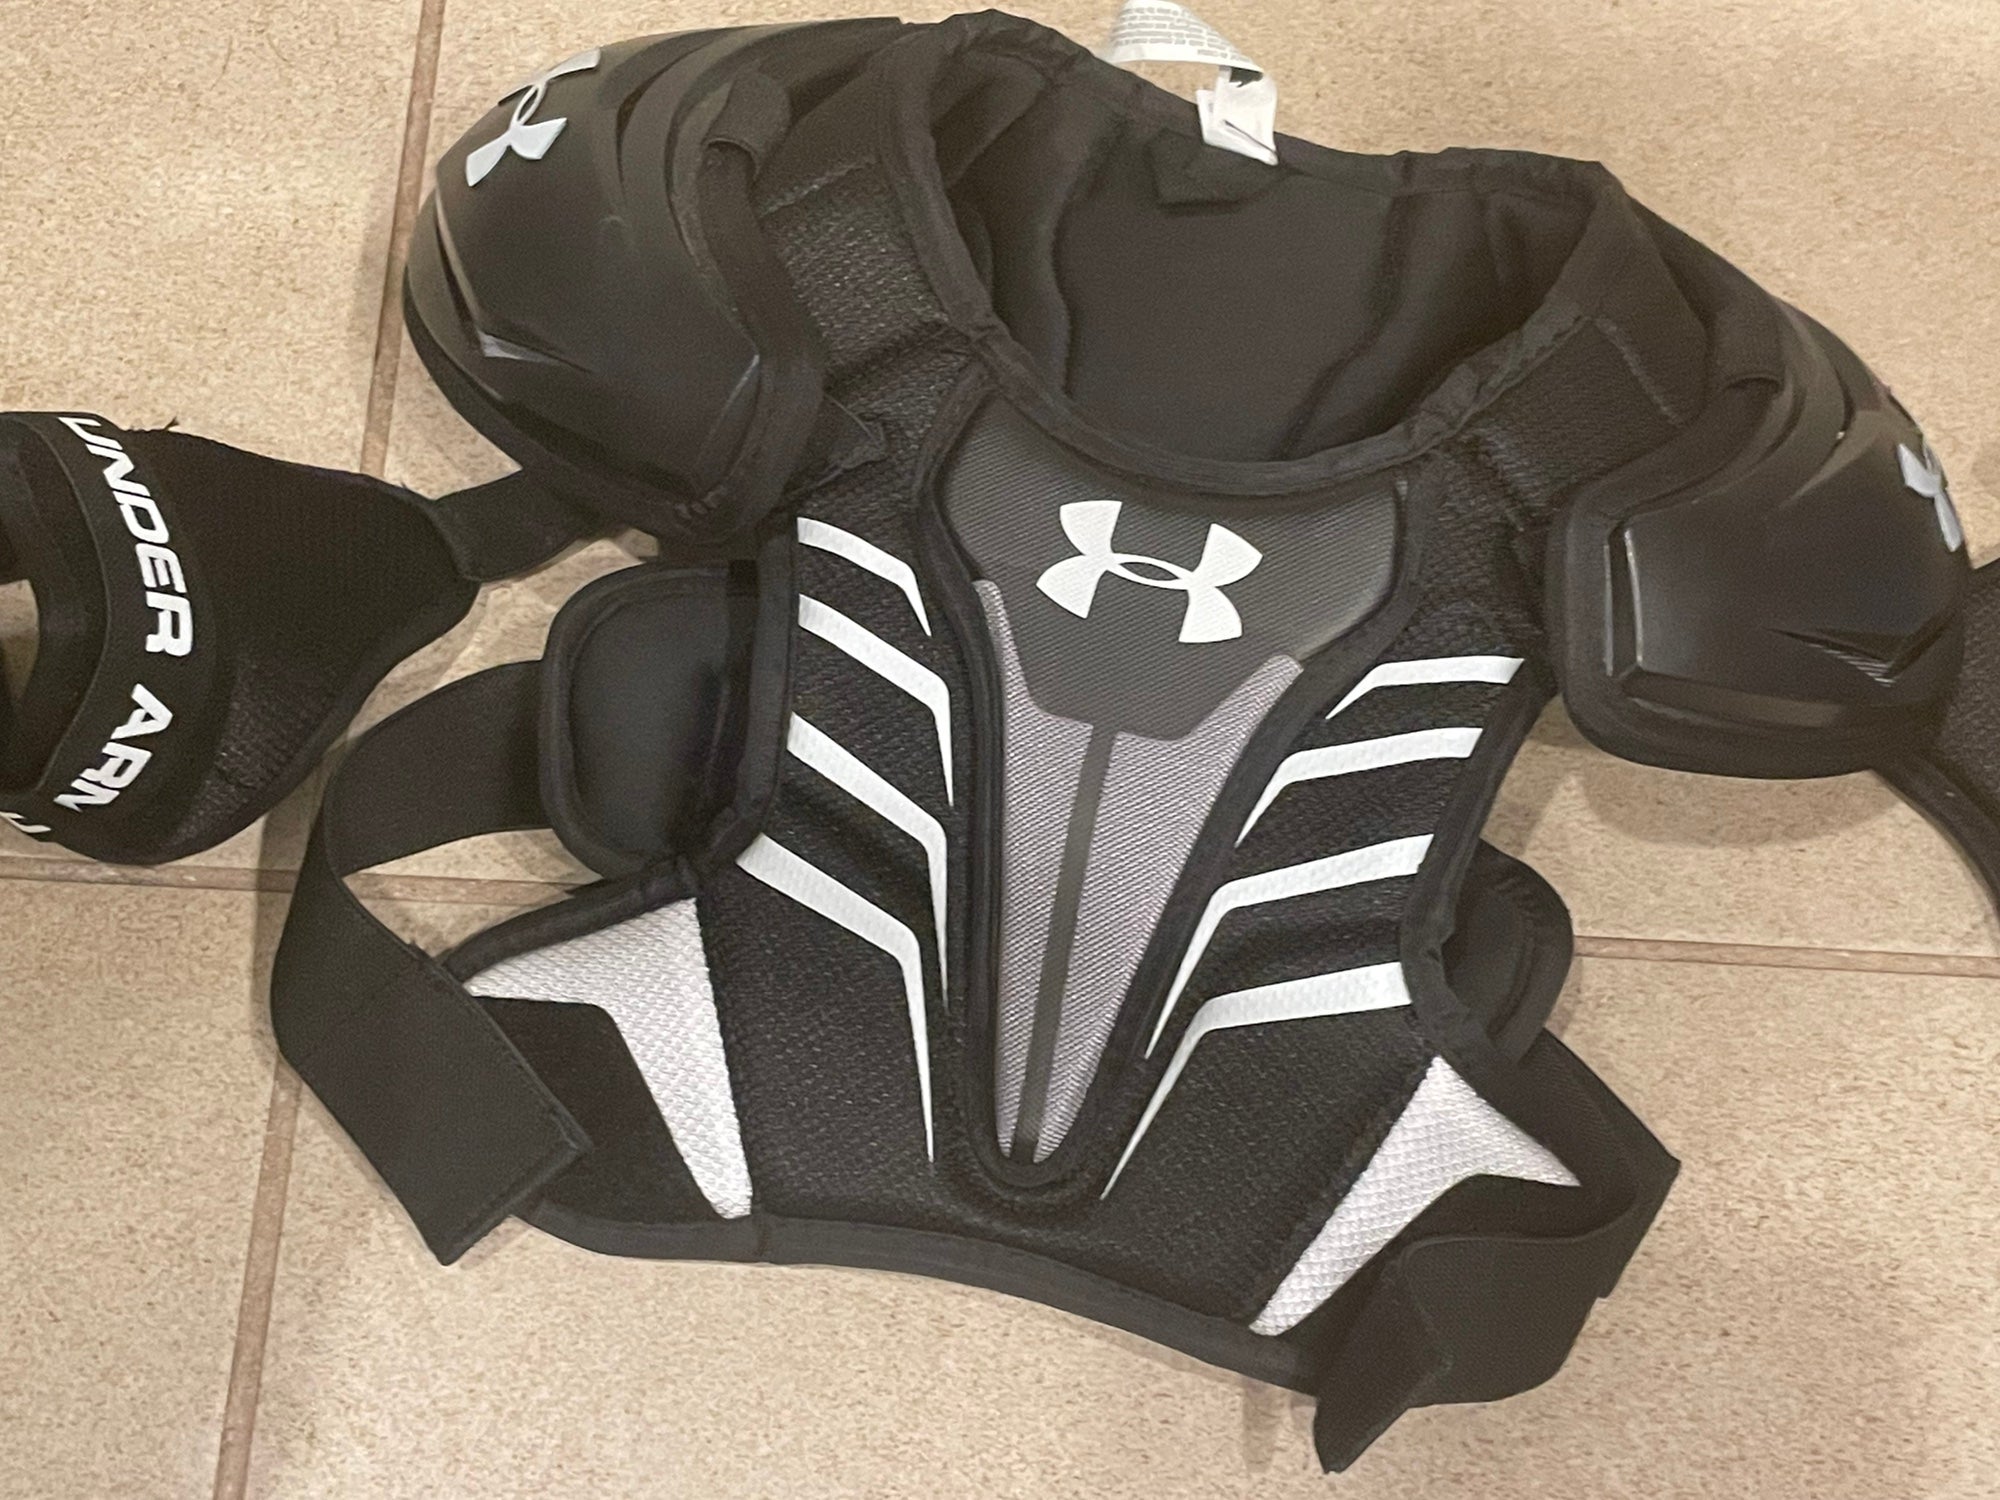 New STX Titan Tyke Box Lacrosse Goalie Chest Protector Youth equipment Cat #1 